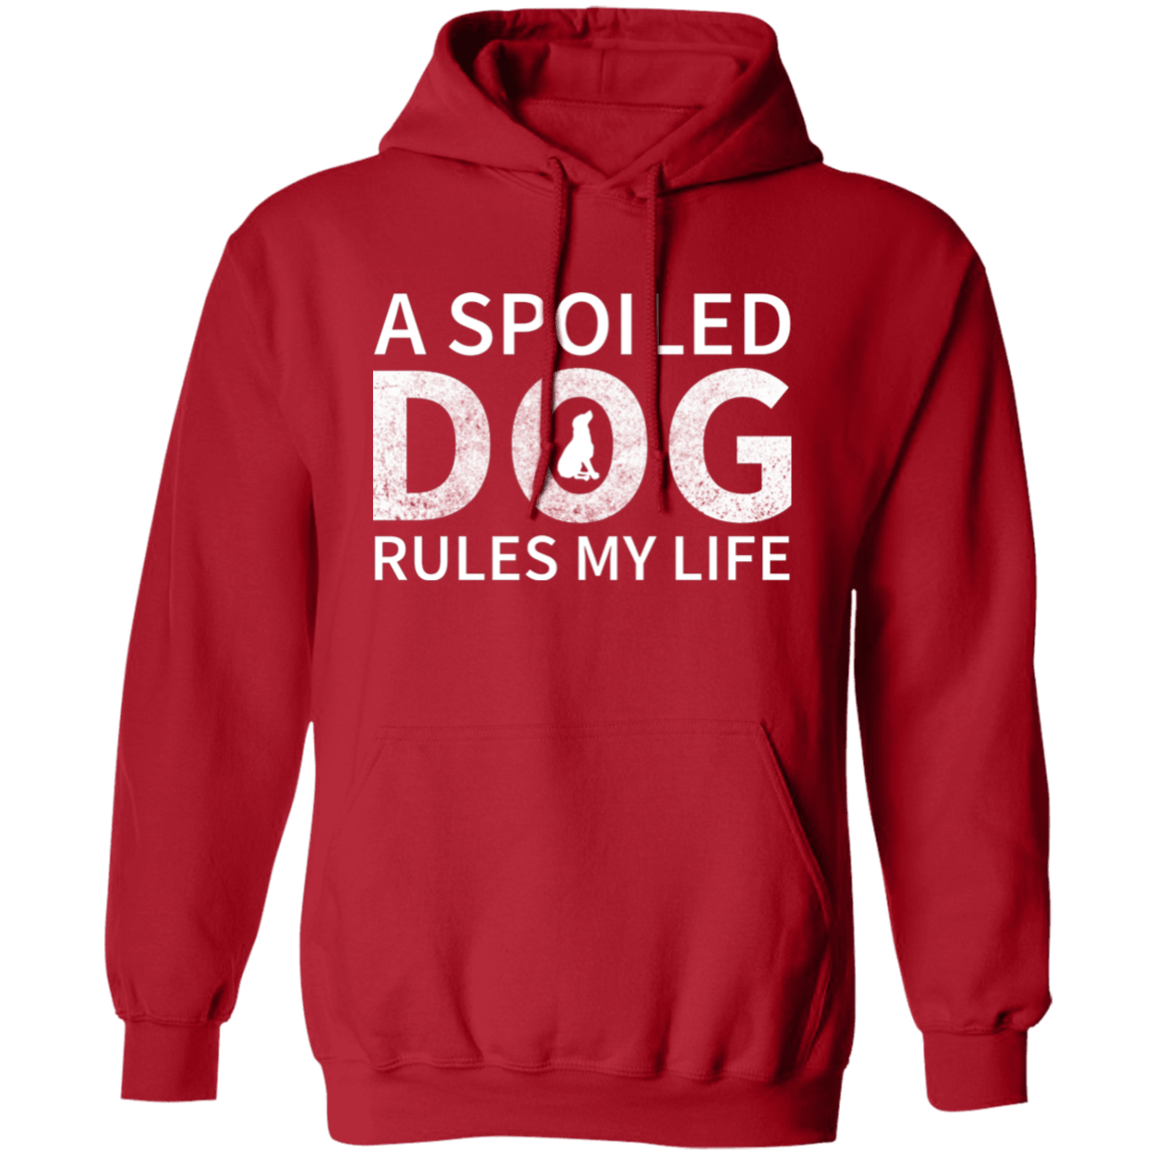 A Spoiled Dog Rules My Life - Hoodie.